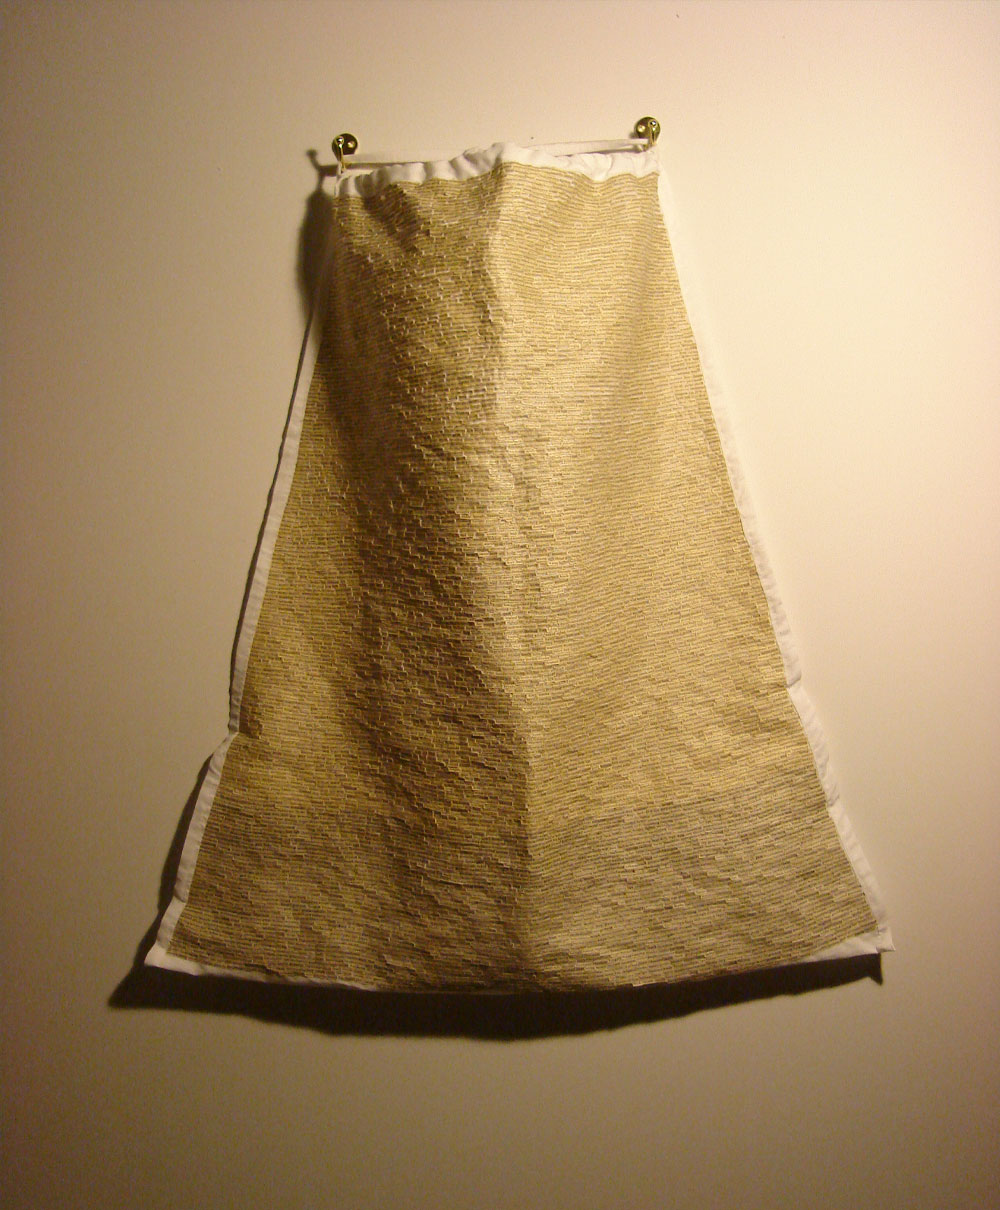 Red Letter Cape - Hand-sewn text on cloth - 2009